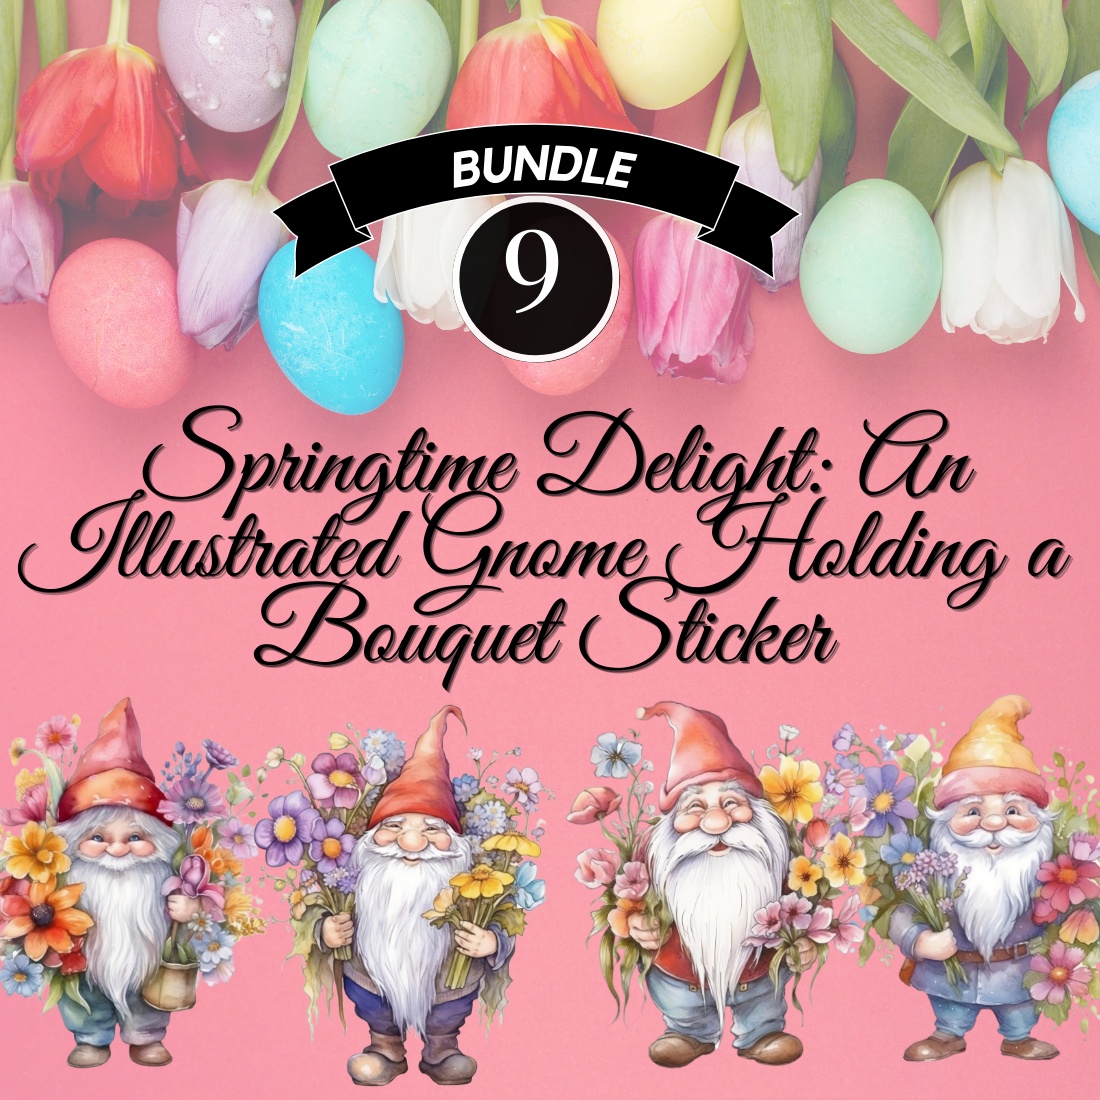 "Springtime Delight: An Illustrated Gnome Holding a Bouquet Sticker" cover image.